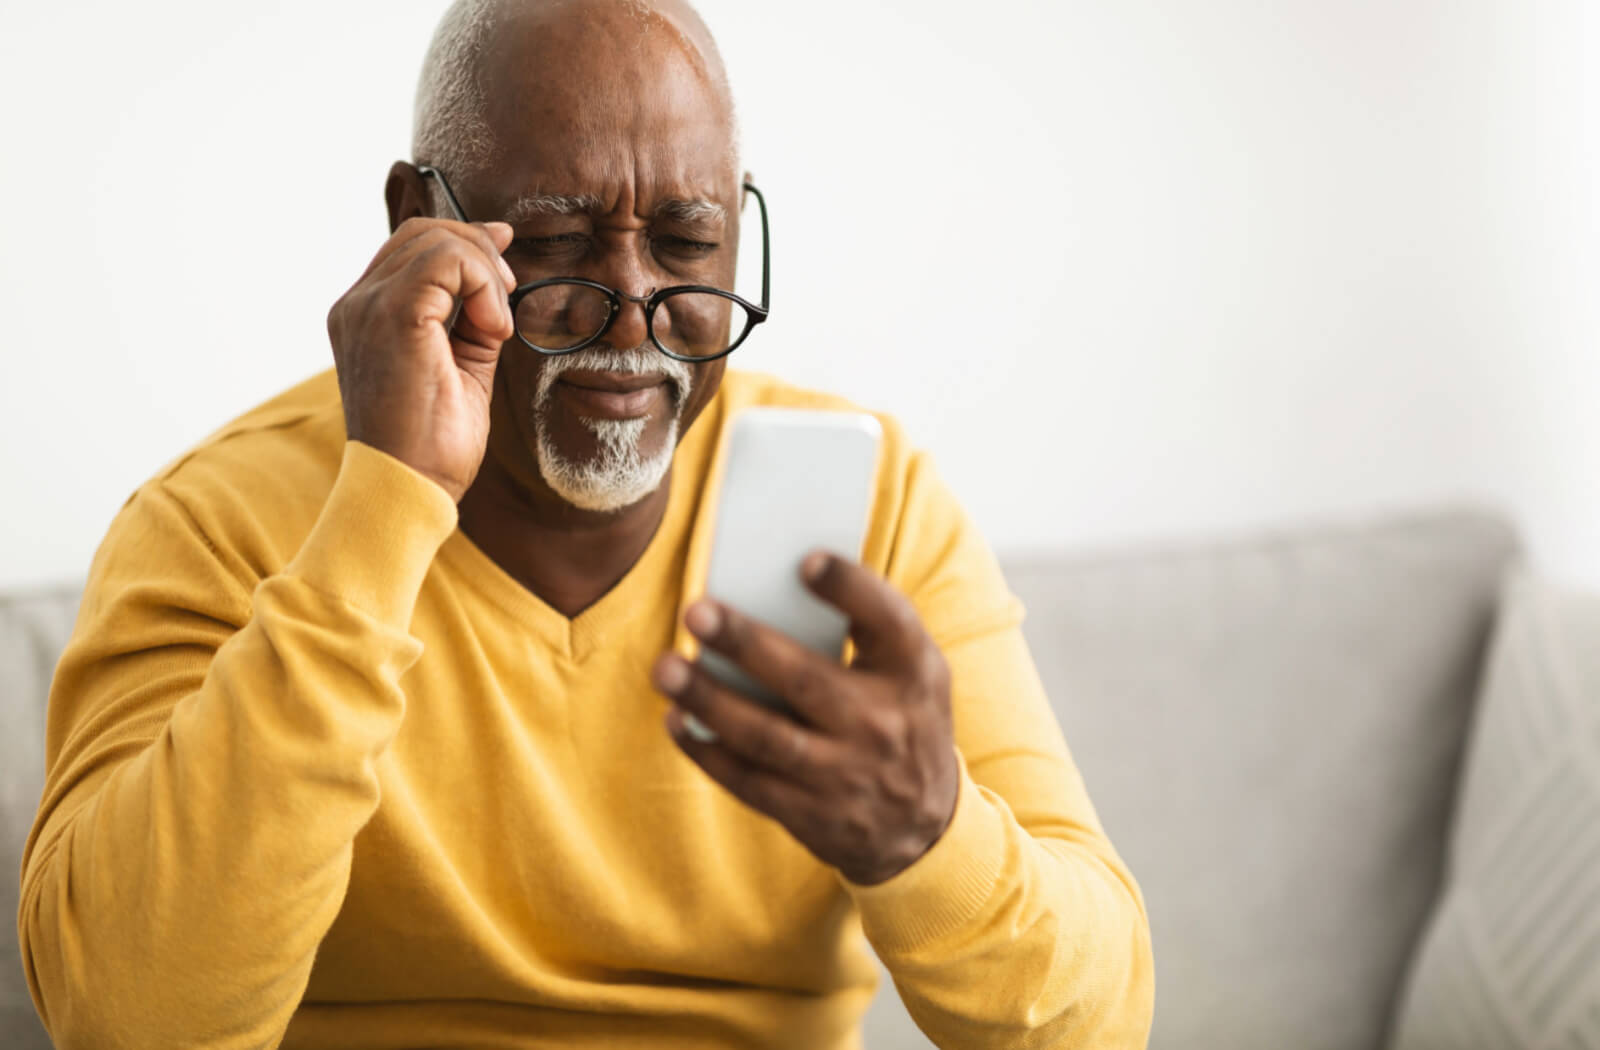 a man looks over the top of his glasses at his cellphone because he is experiencing blurred vision due to glaucoma